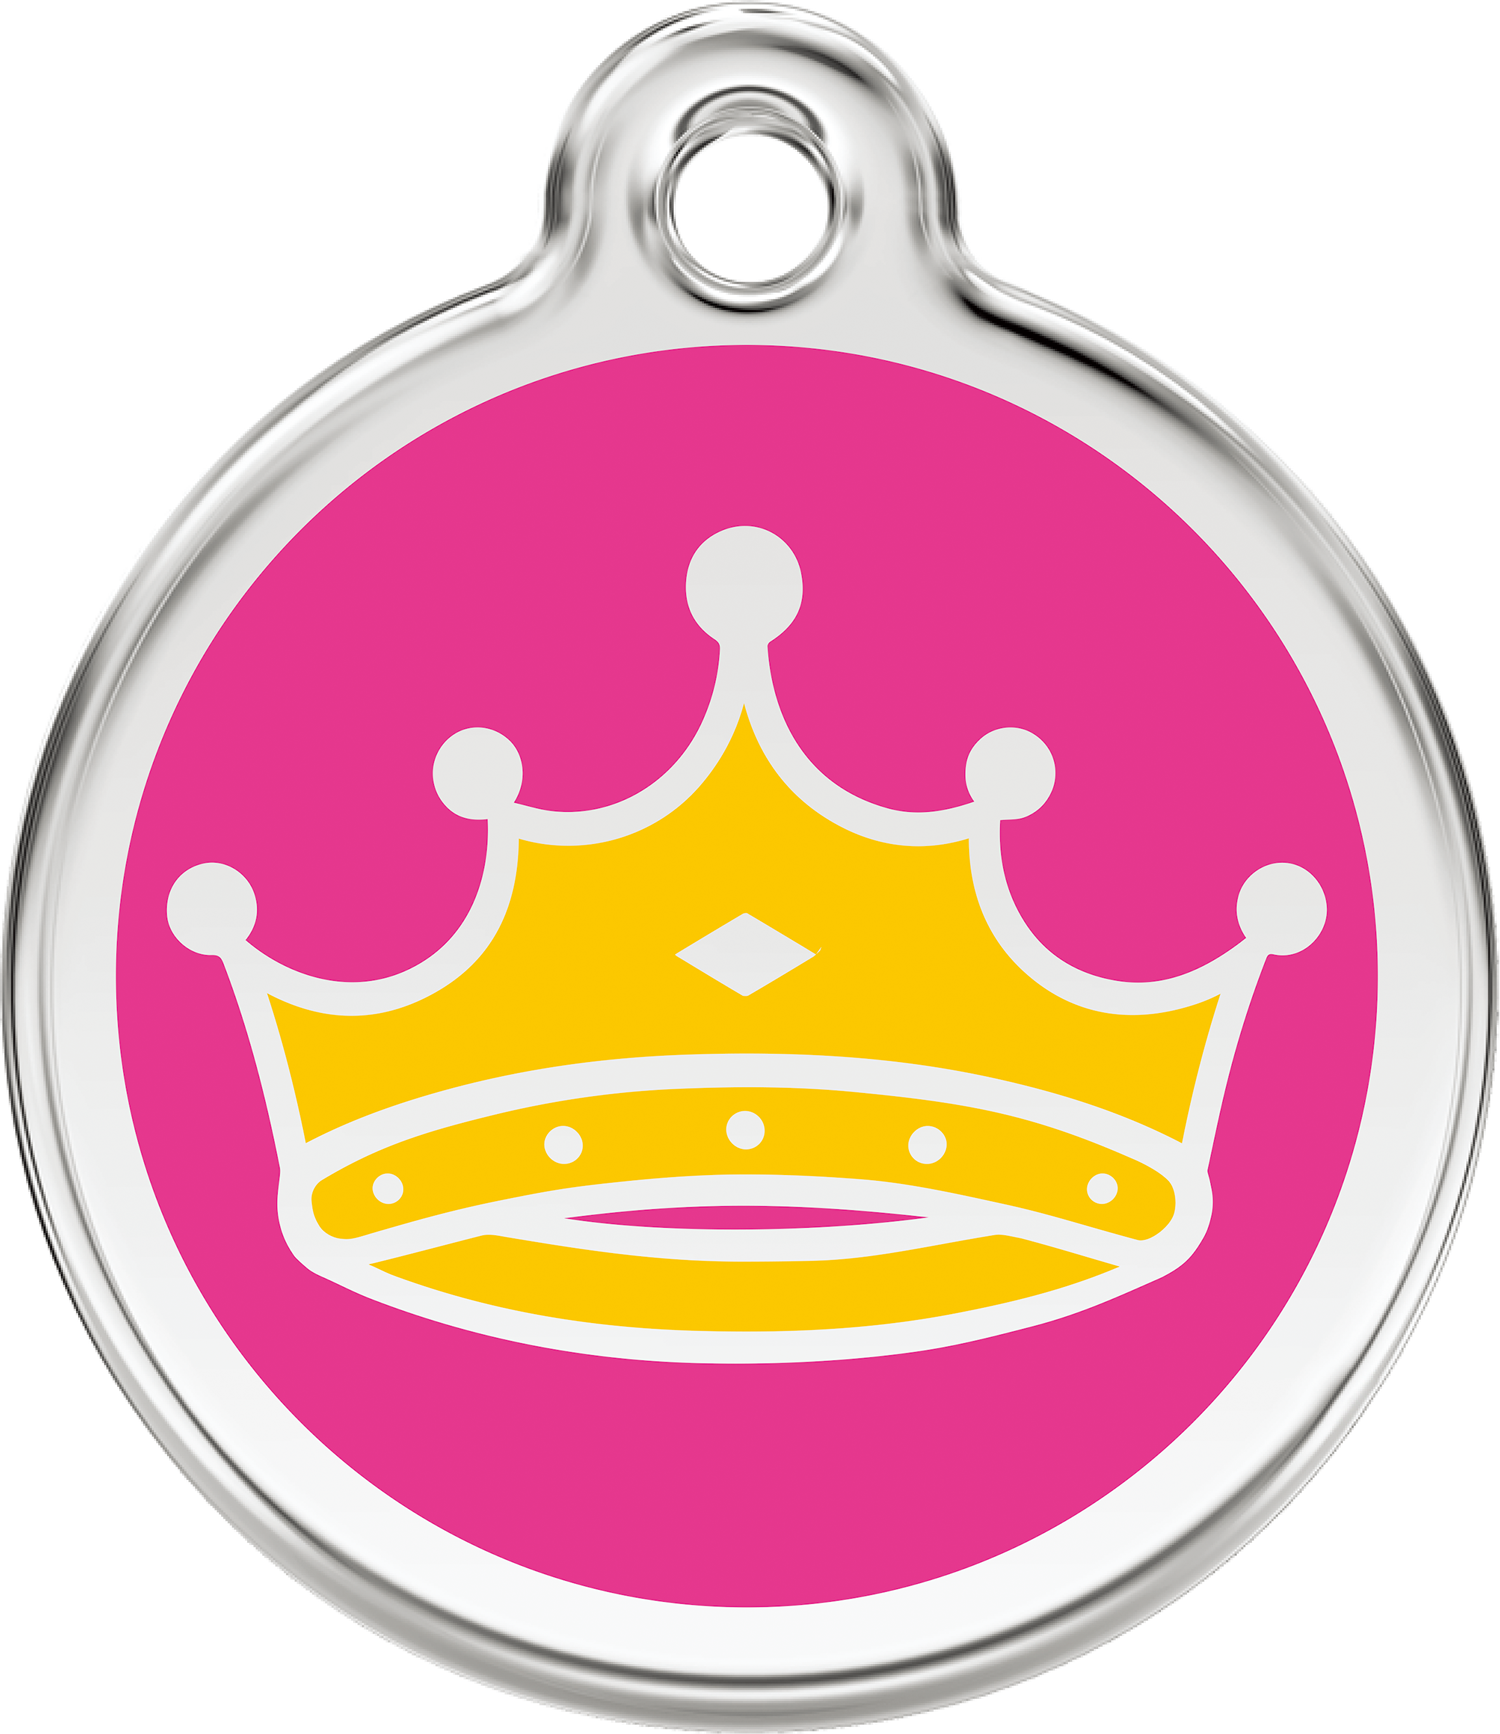 1qchpm, 9330725055568, Image - Red Dingo Queen Pet Id Tag - Hot Pink (1500x1734)